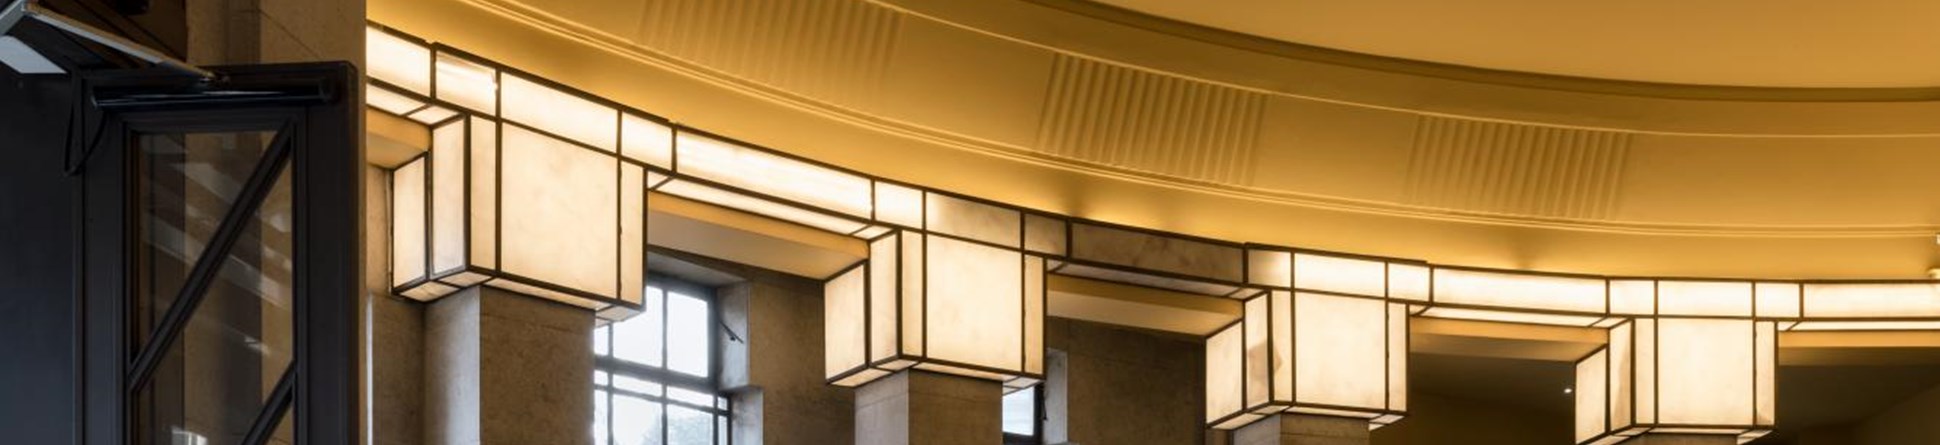 photo of original Art Deco lights in the foyer of Broadcasting House, London